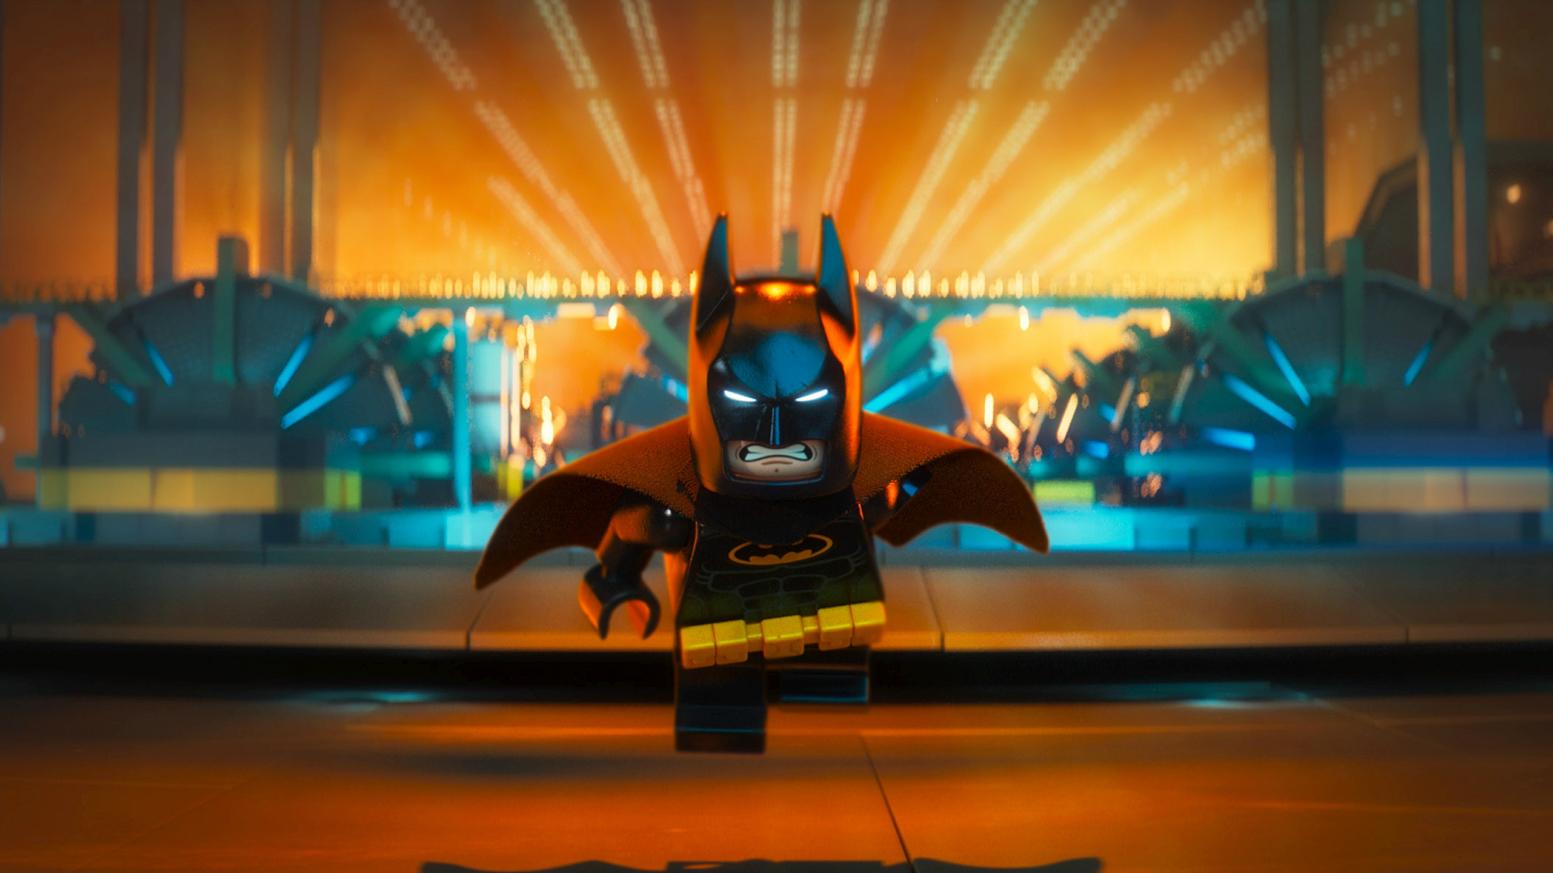 Lego Batman Movie Gets Old. Michelle's Review!